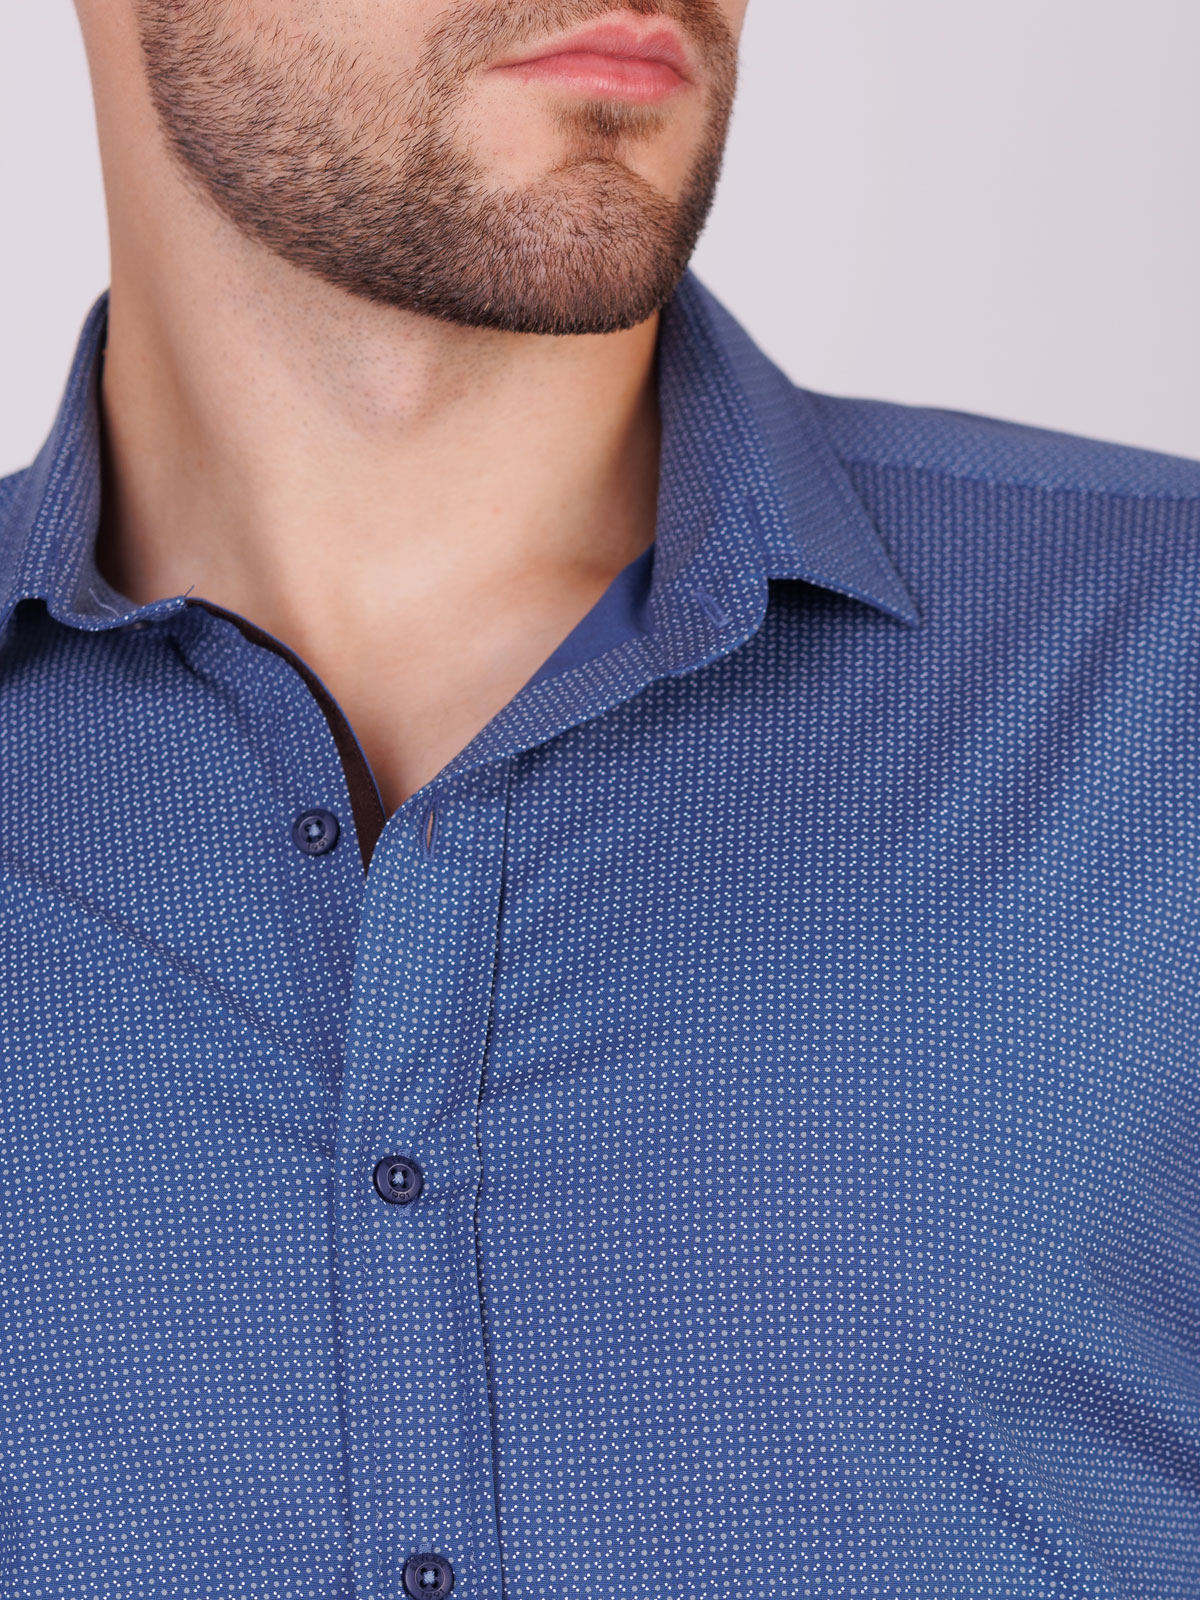 Shirt in blue with tiny dots - 21552 € 44.43 img3